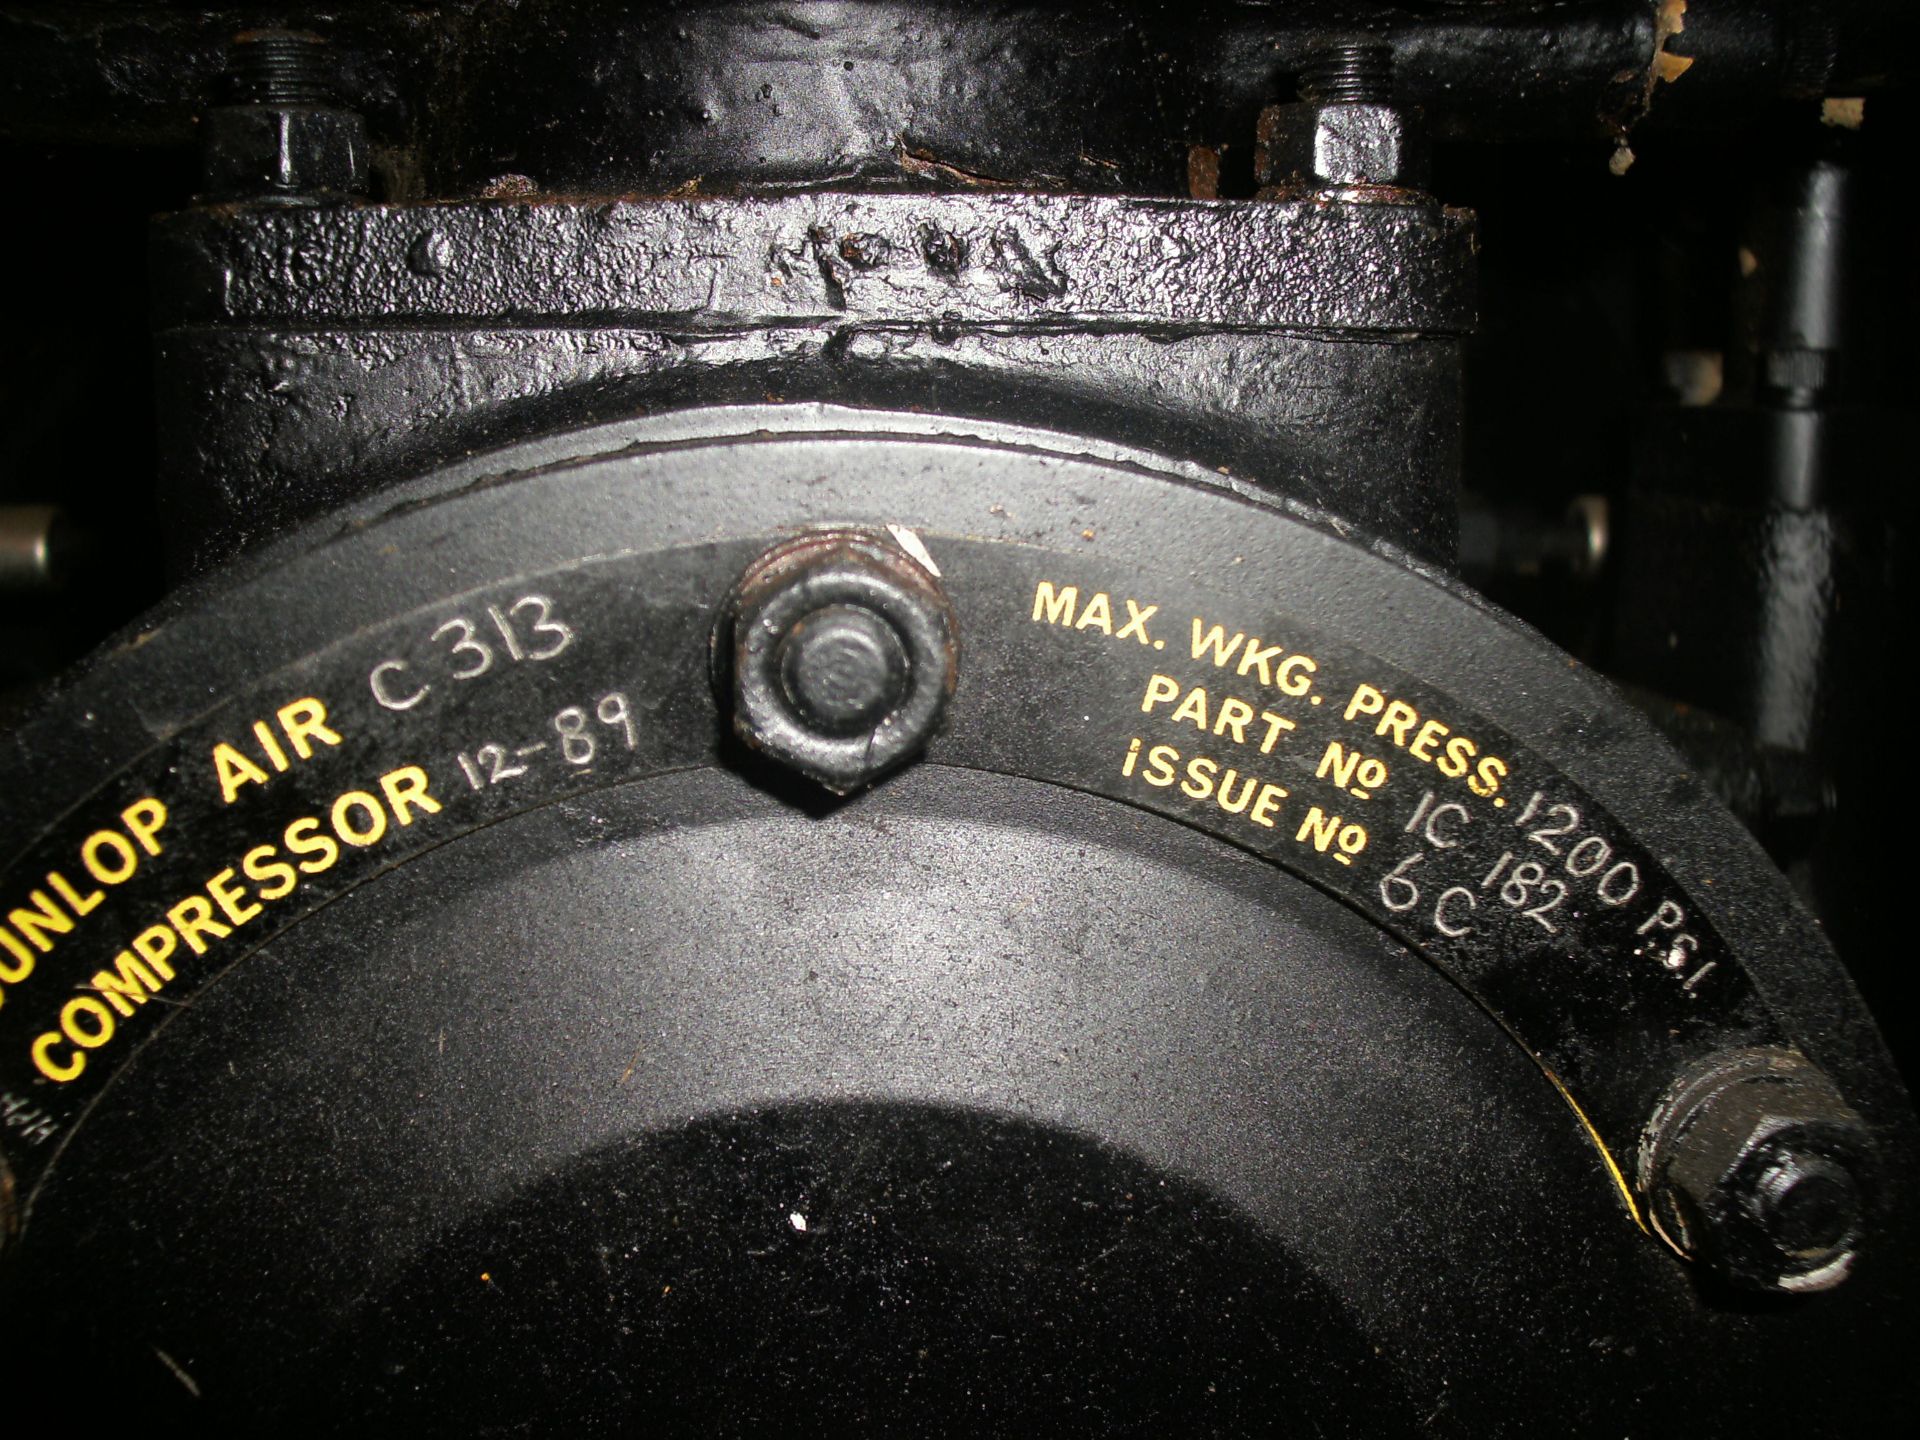 * Diesel Engine Enfield ho2 V twin compressor for diving use, Max working pressure1200PSI unused - Image 7 of 7